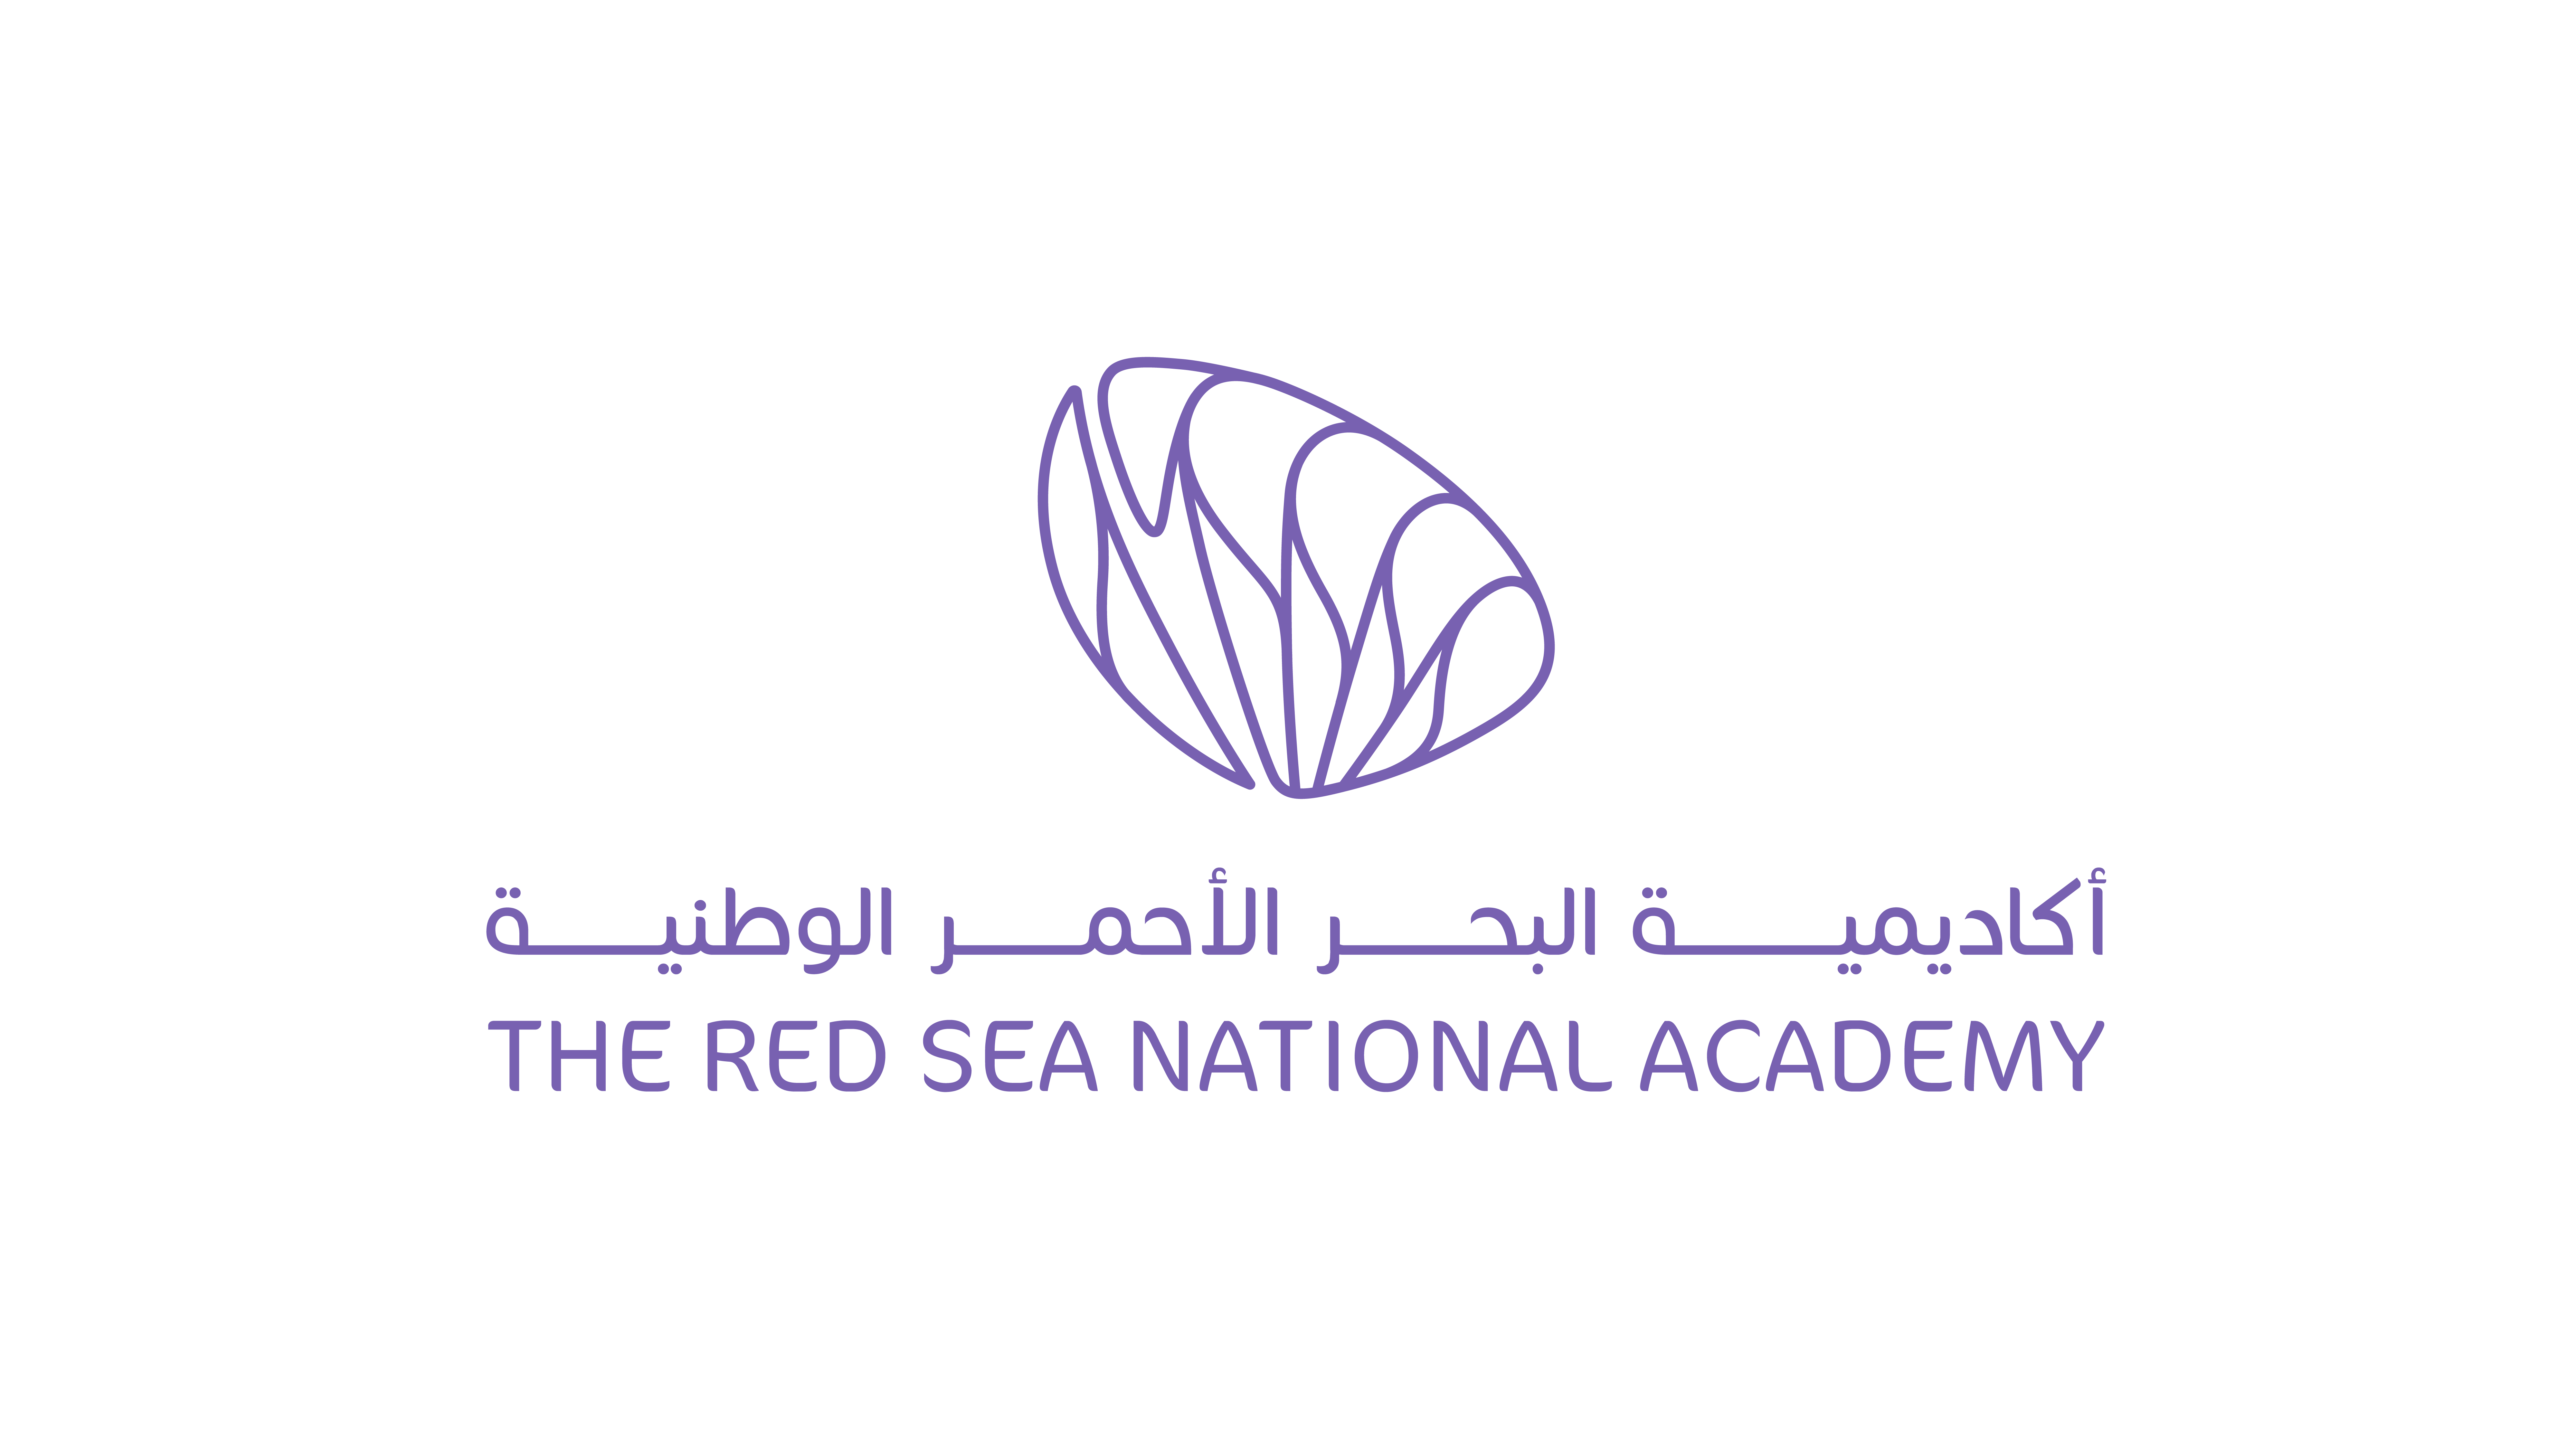 Establishment of The Red Sea National Academy 